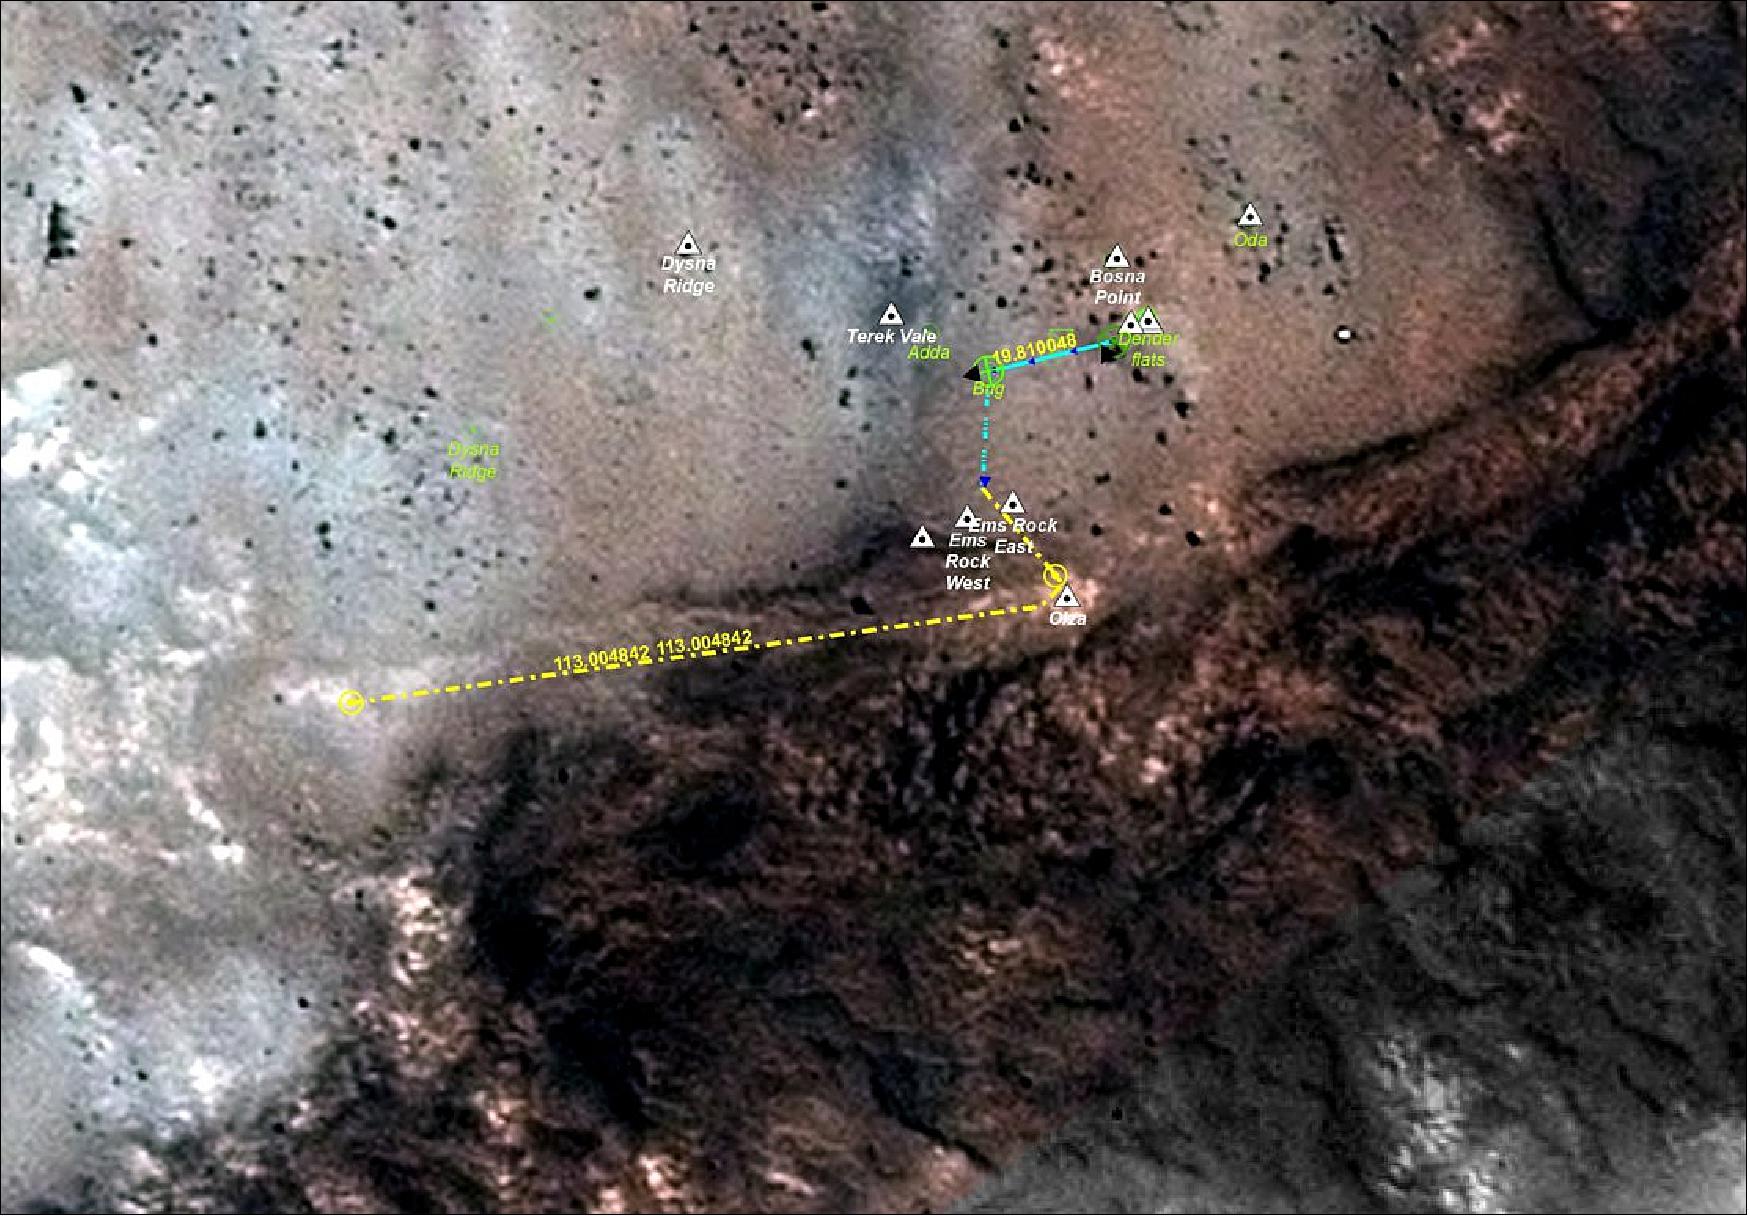 Figure 75: The path taken by the ExoFit model during a campaign at the Atacama Desert, in Chile – following commands from mission control in the United Kingdom, over 11,000 km away. The ExoFiT field campaign simulates ExoMars operations in every key aspect. During the trial, the rover drove from its landing platform and targets sites of interest to sample rocks in the Mars-like landscapes of the Chilean desert. The team behind the exercise, a mix of scientists and engineers, is simulating all the challenges of a real mission on the Red Planet, including communication delays, local weather conditions and tight deadlines. The rover is equipped with a set of cameras and proxy instruments, such as a radar, a spectrometer and a drill, to replicate martian operations. Scientists in the UK must take decisions on the next steps with the little information they have – a combination of the data transmitted by the rover and satellite images of the terrain. The ExoFiT teams in the UK set the exploration path and activities for the rover, which travels at a speed of 2 cm/s avoiding rocks and overcoming slopes (image credit: ESA/Airbus)